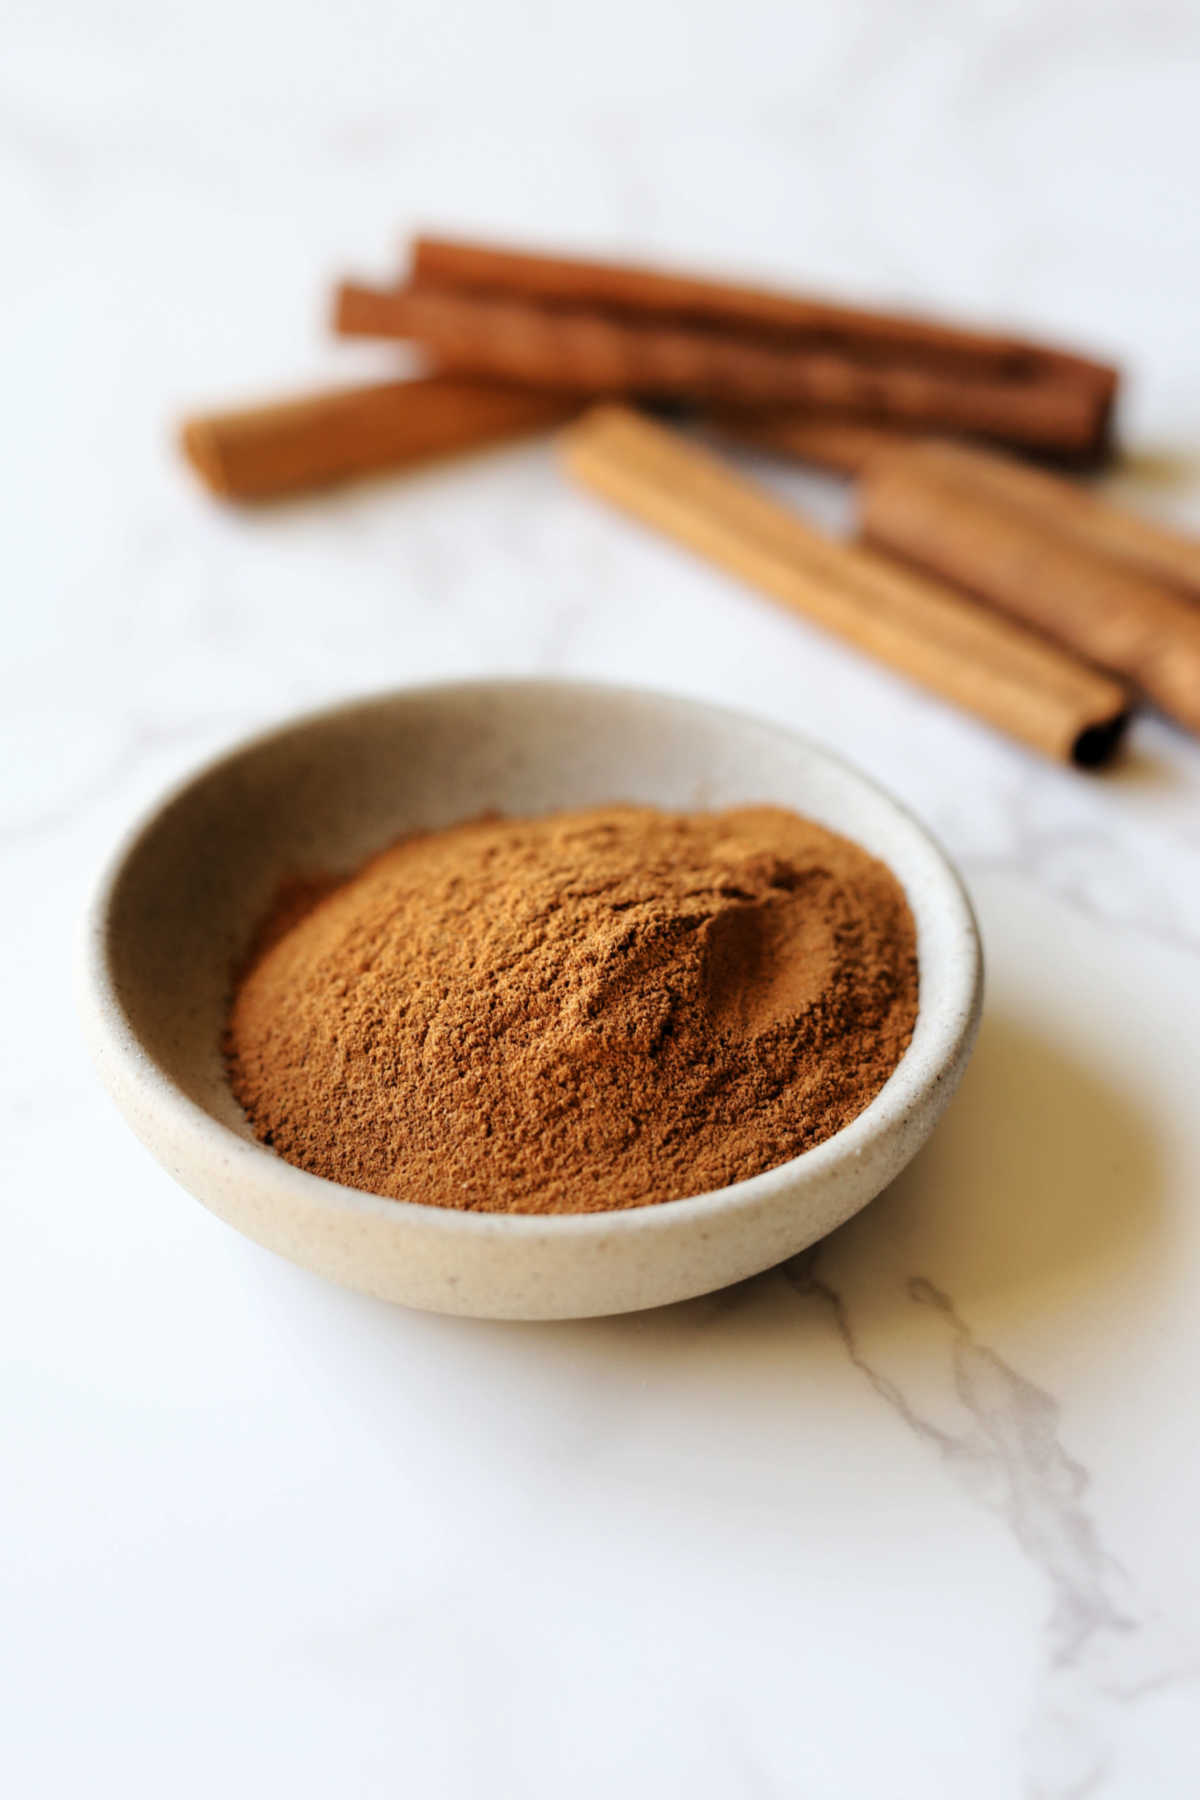 Ground cinnamon in a bowl as a substitute for cinnamon sticks.